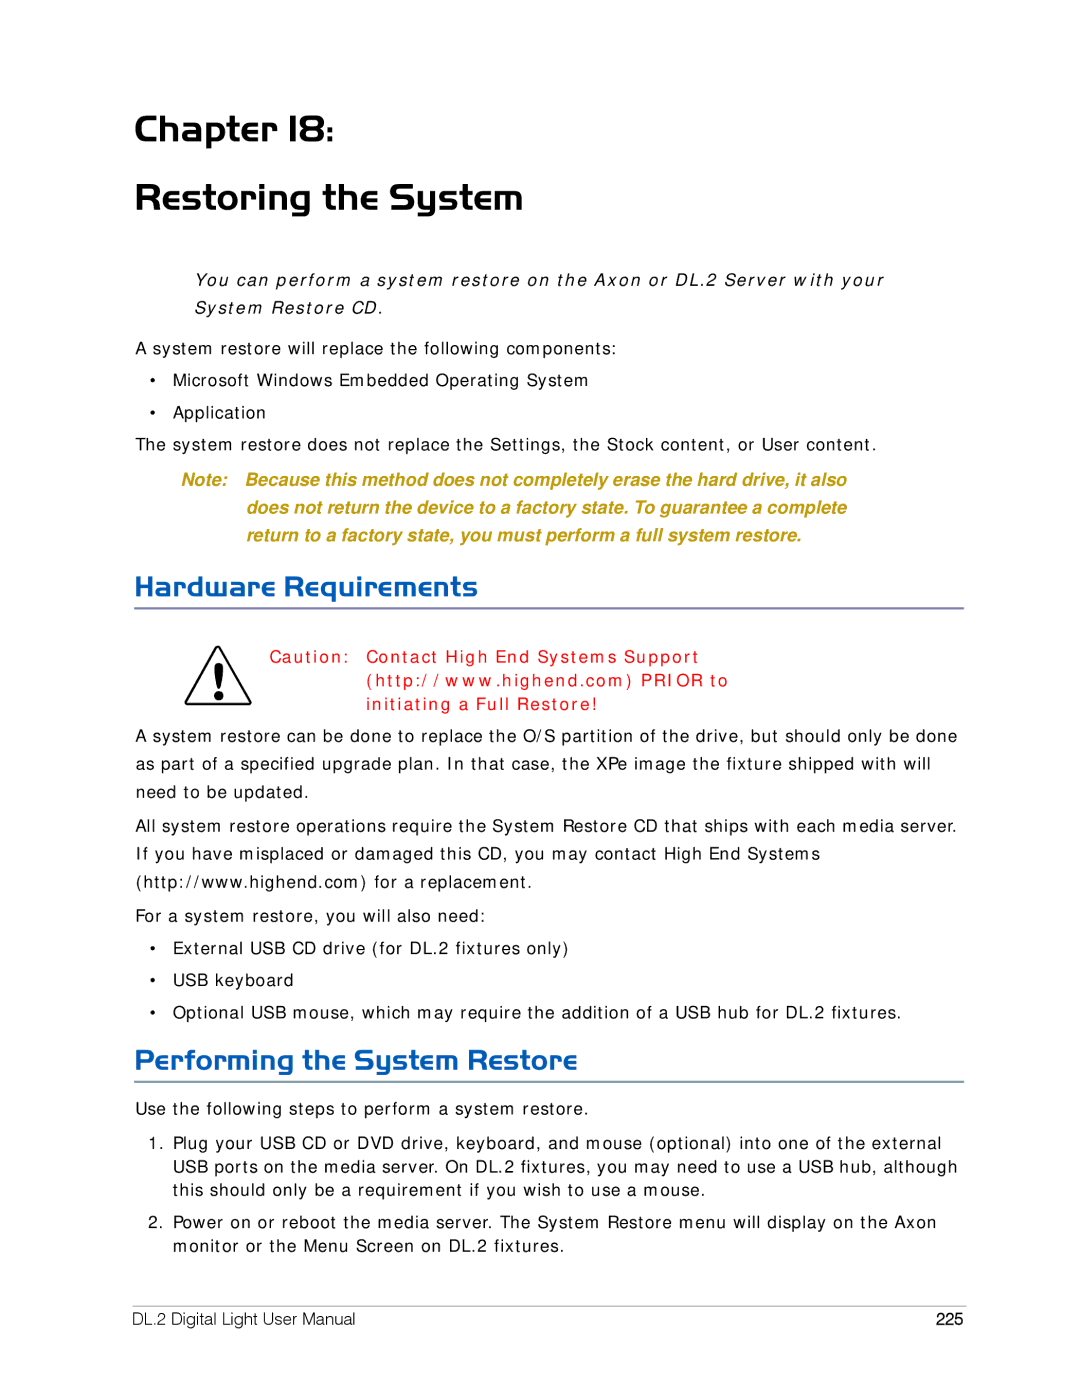 High End Systems DL.2 user manual Chapter Restoring the System, Hardware Requirements, Performing the System Restore, 225 